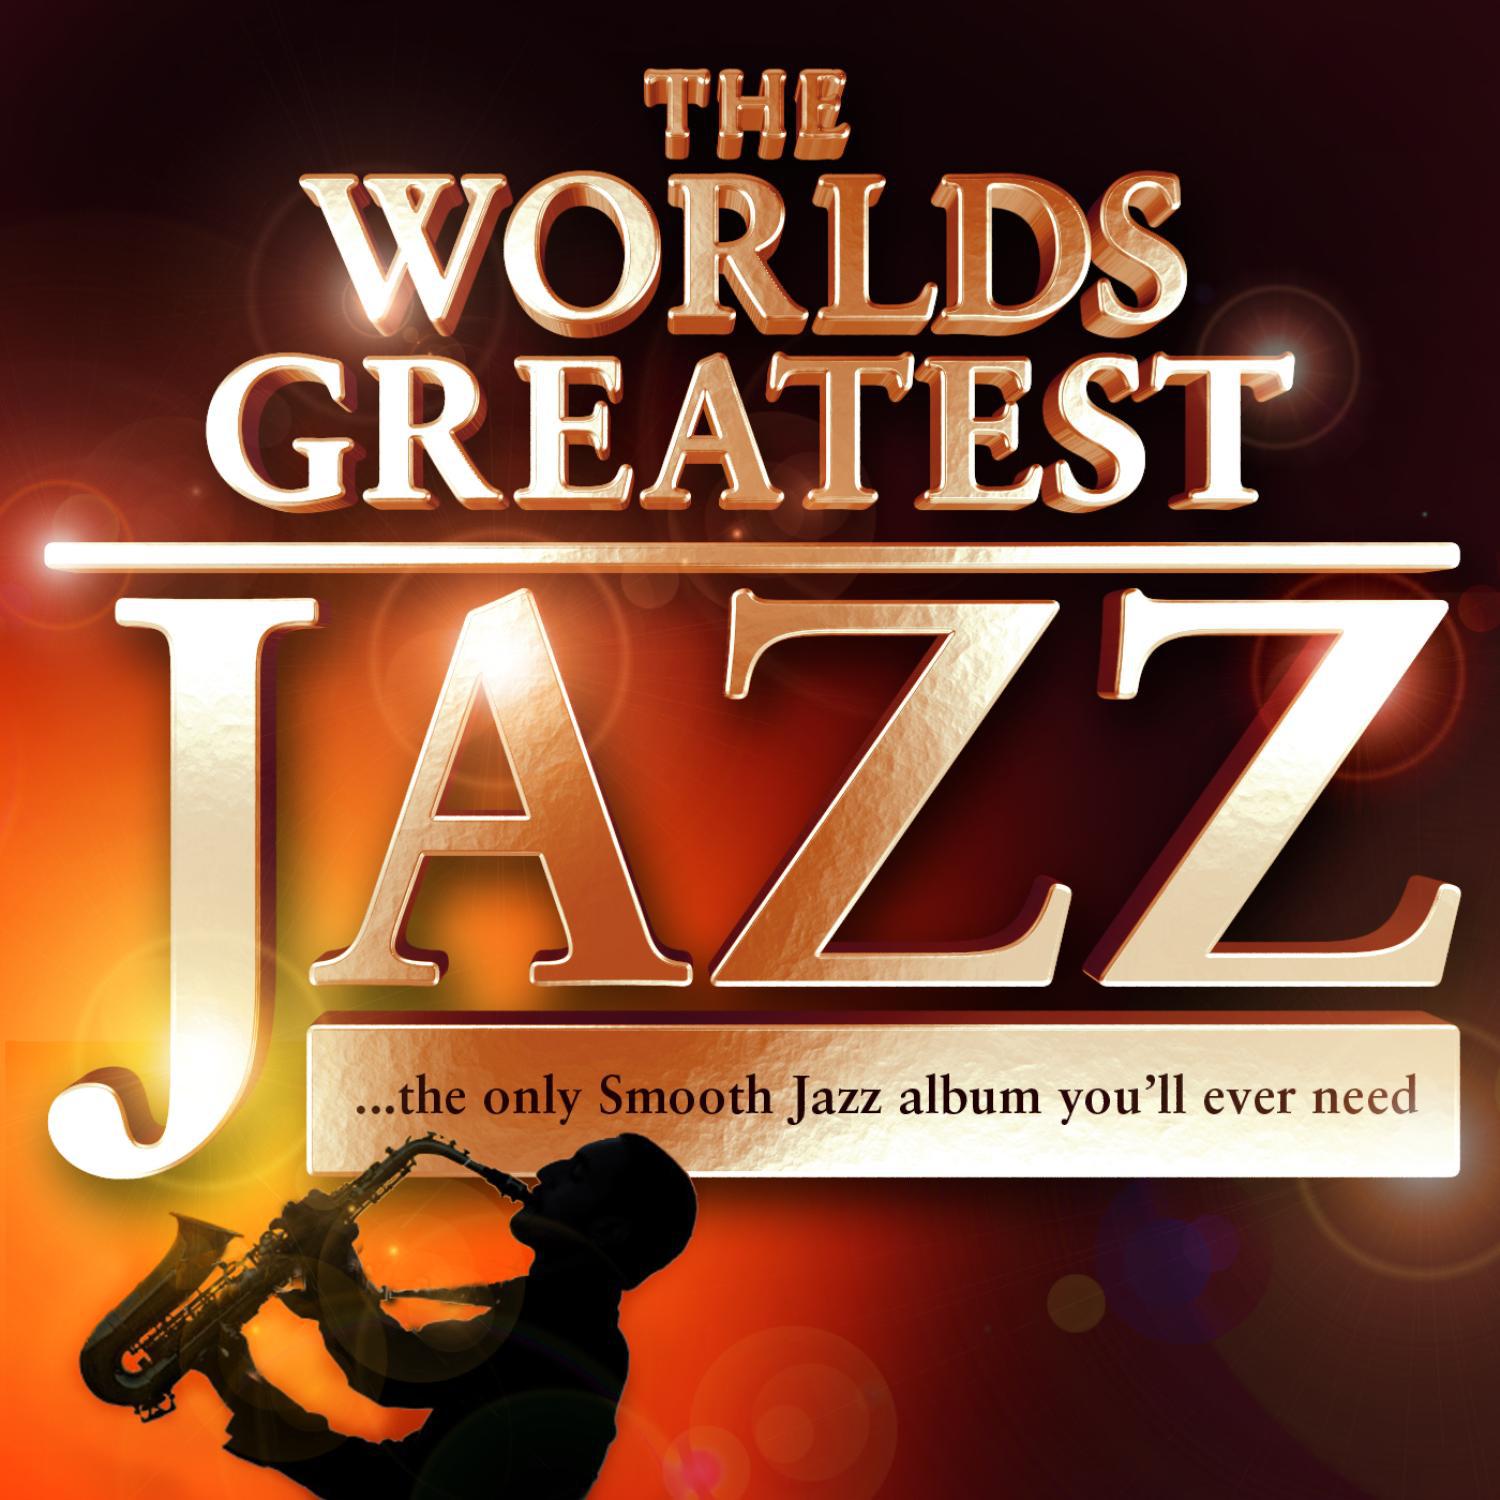 40  Worlds Greatest Jazz  The only Smooth Jazz album you' ll ever need